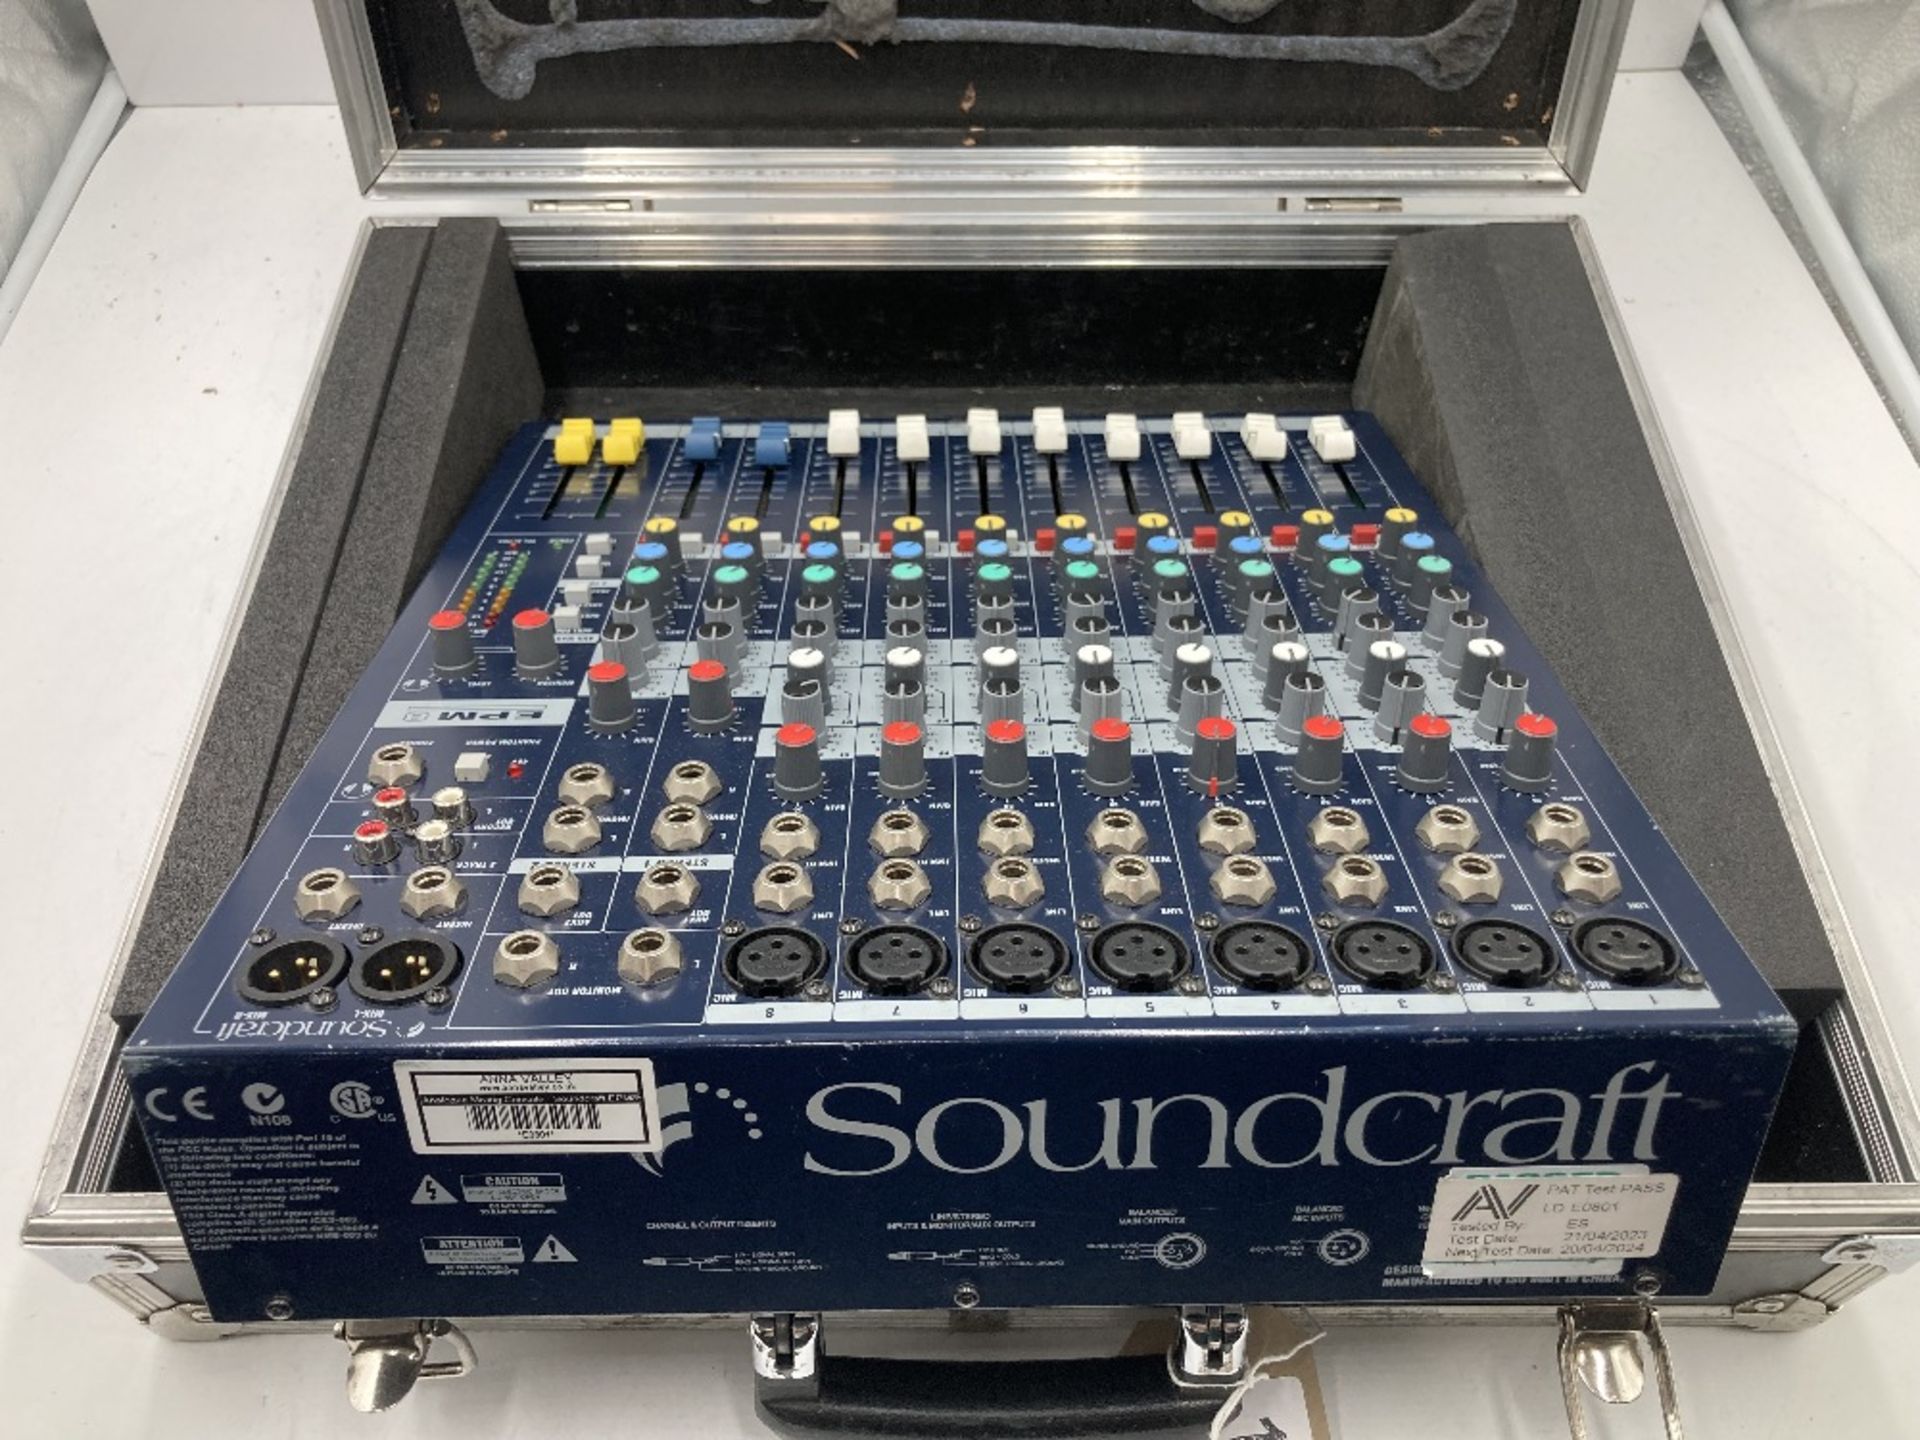 Soundcraft EPM8 Analogue Mixing Console & Heavy Duty Briefcase - Image 4 of 9